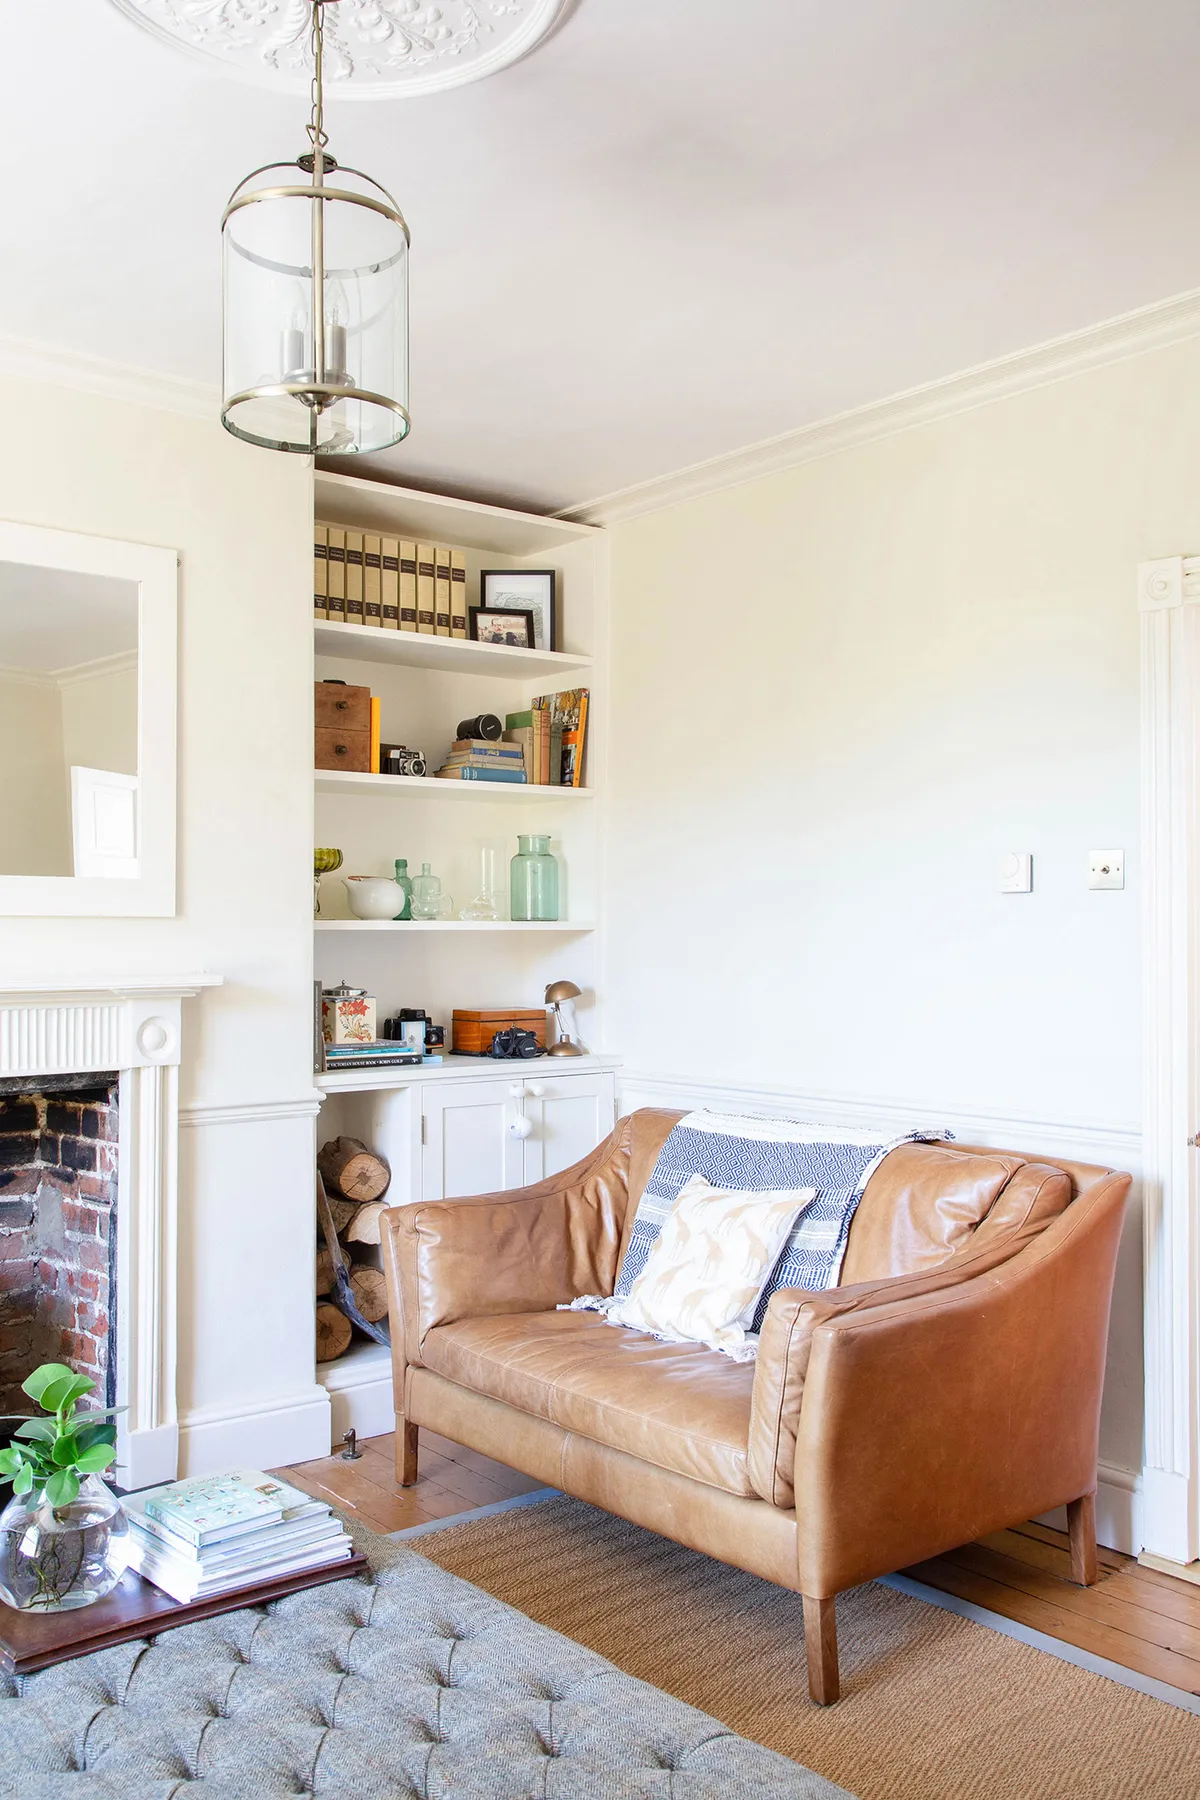 The couple restored the original floorboards, opened up the bricked-up fireplace to install a log burner, and decorated in neutrals to draw focus to the room’s character